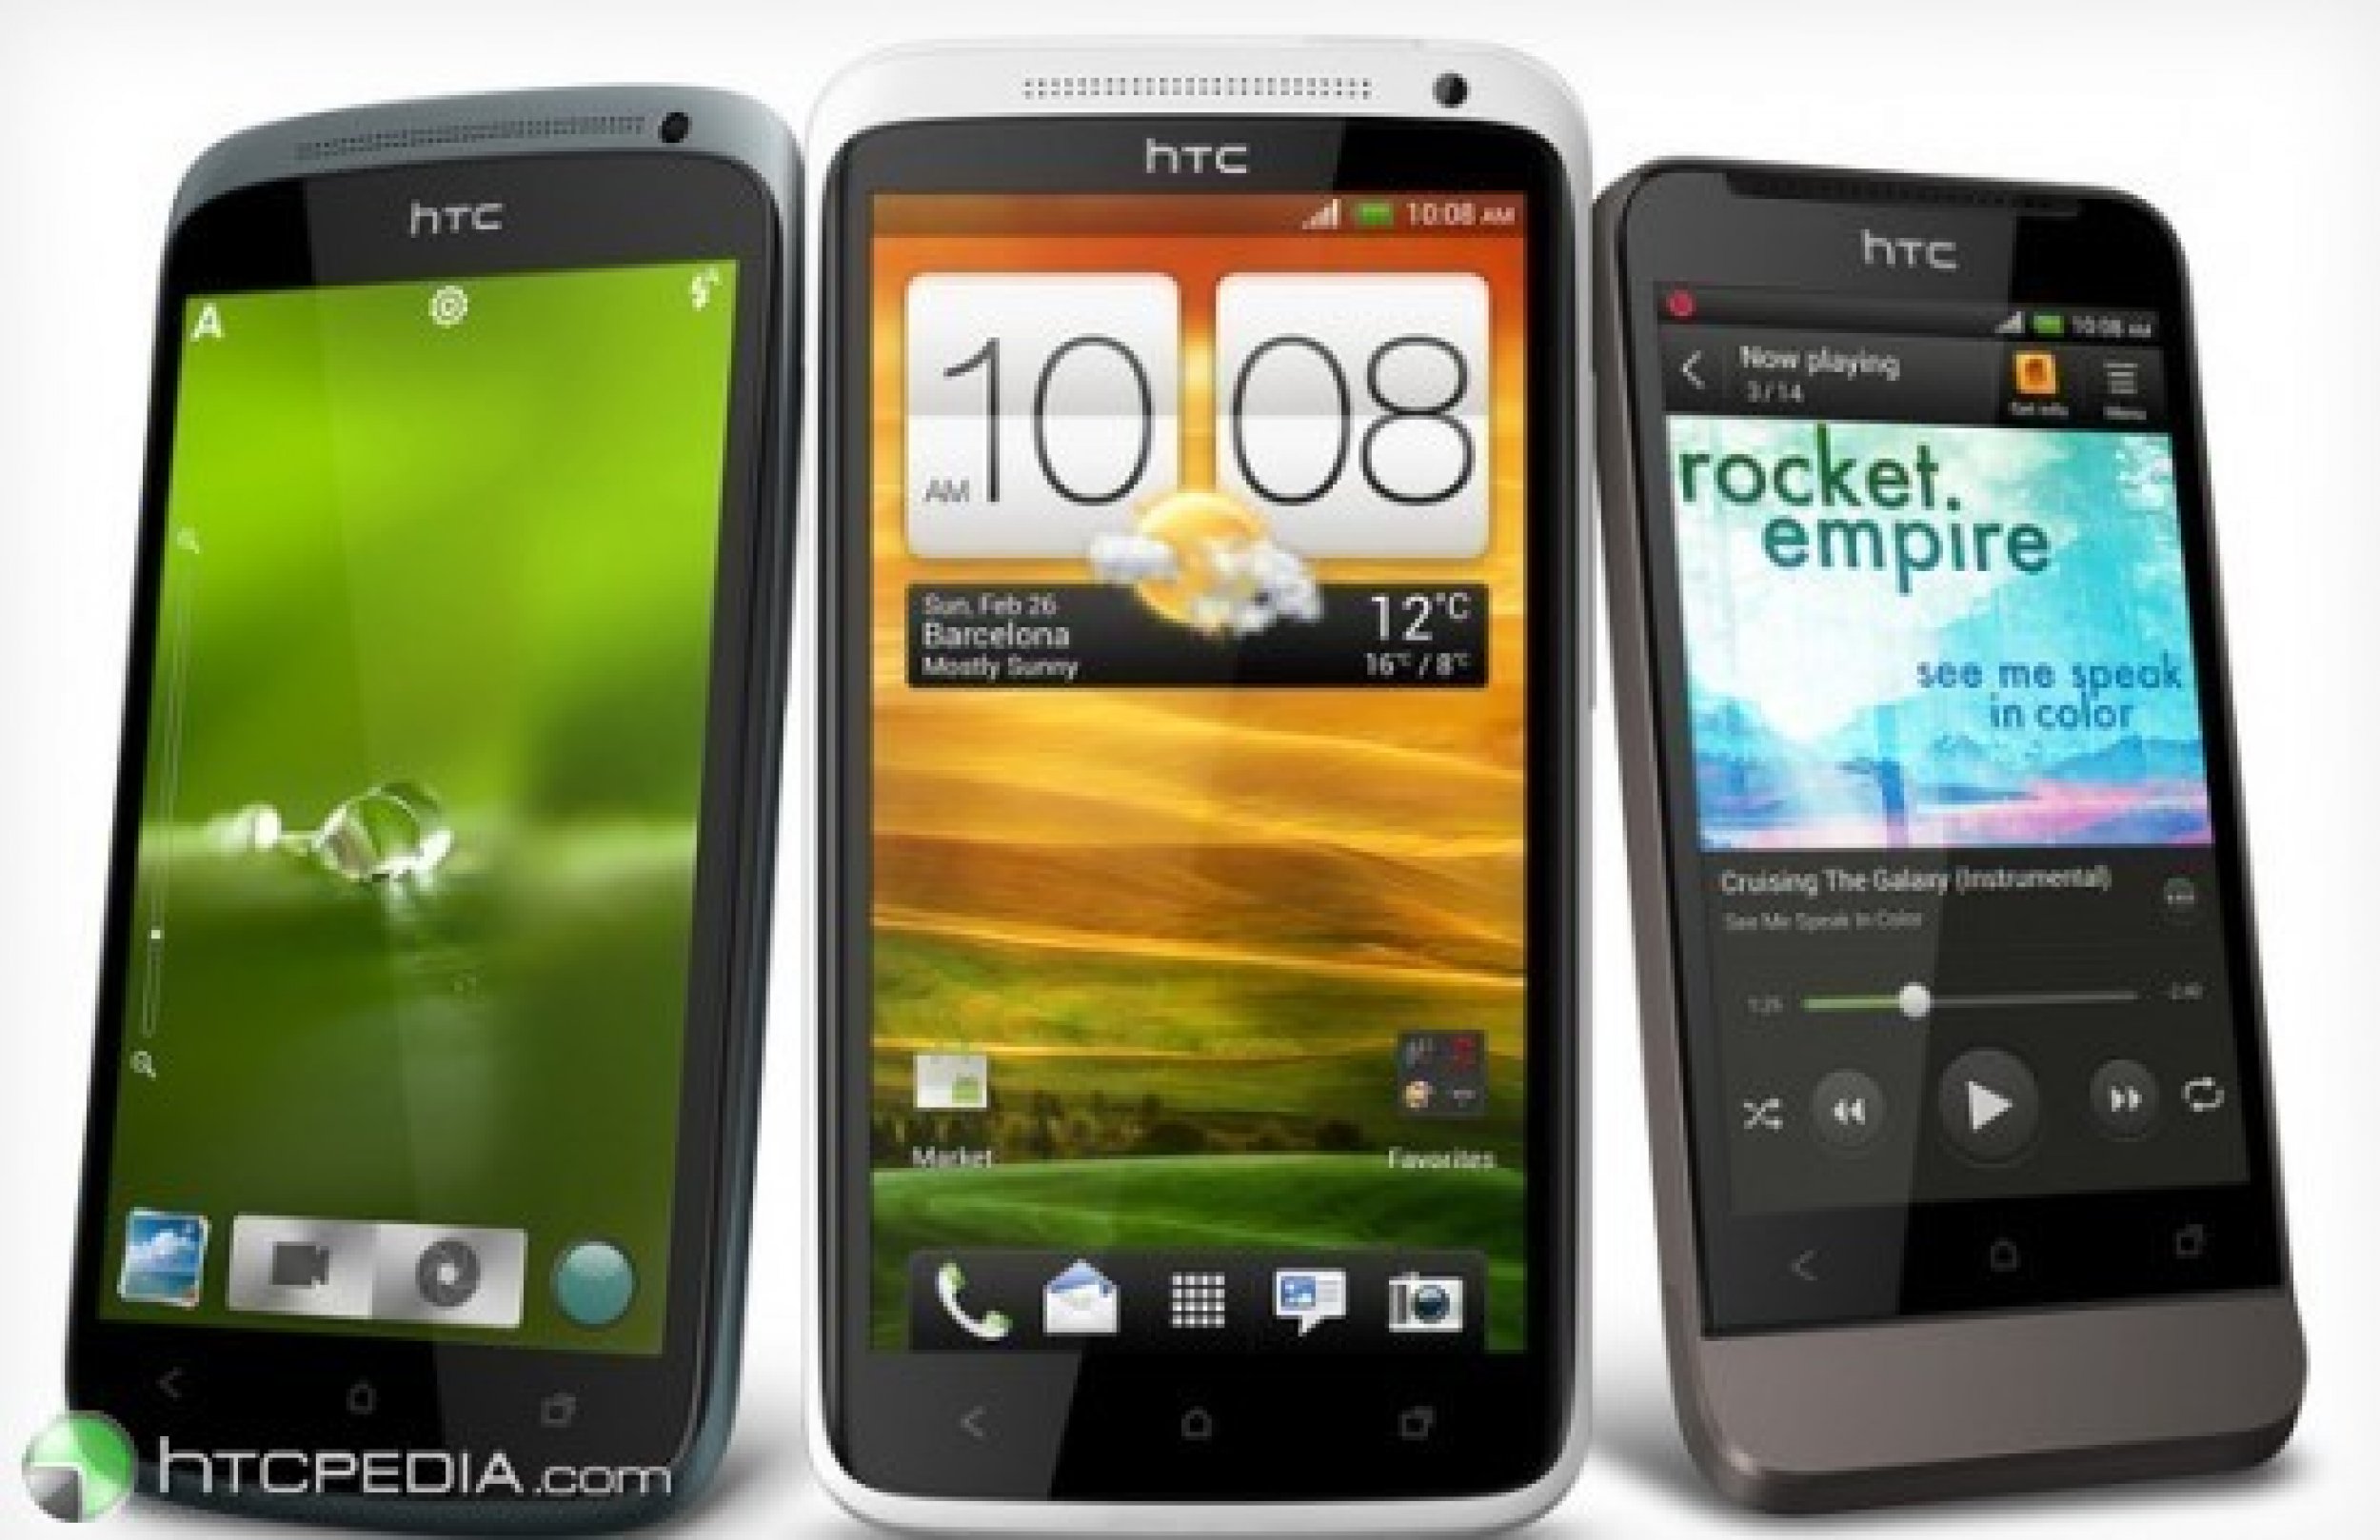 HTC at MWC